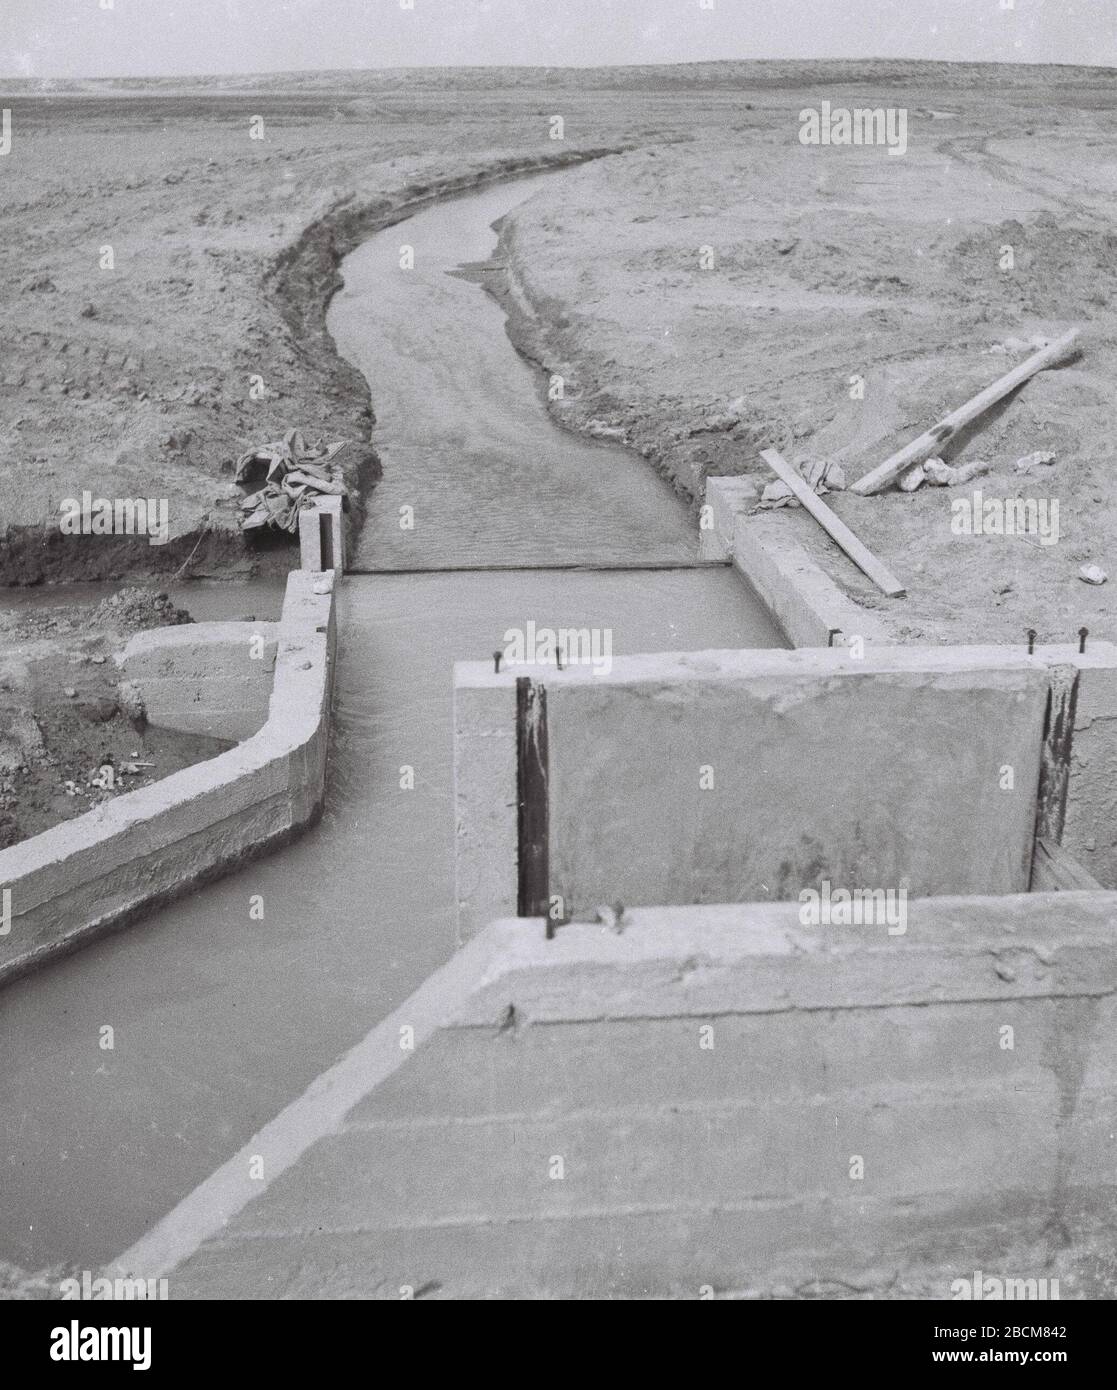 English The Water Reservoir At Bir Asluj In The Negev U E I I U O U E O O C I E E O E U I N E I E 17 March 1945 This Is Available From National Photo Collection Of Israel Photography Dept Goverment Press